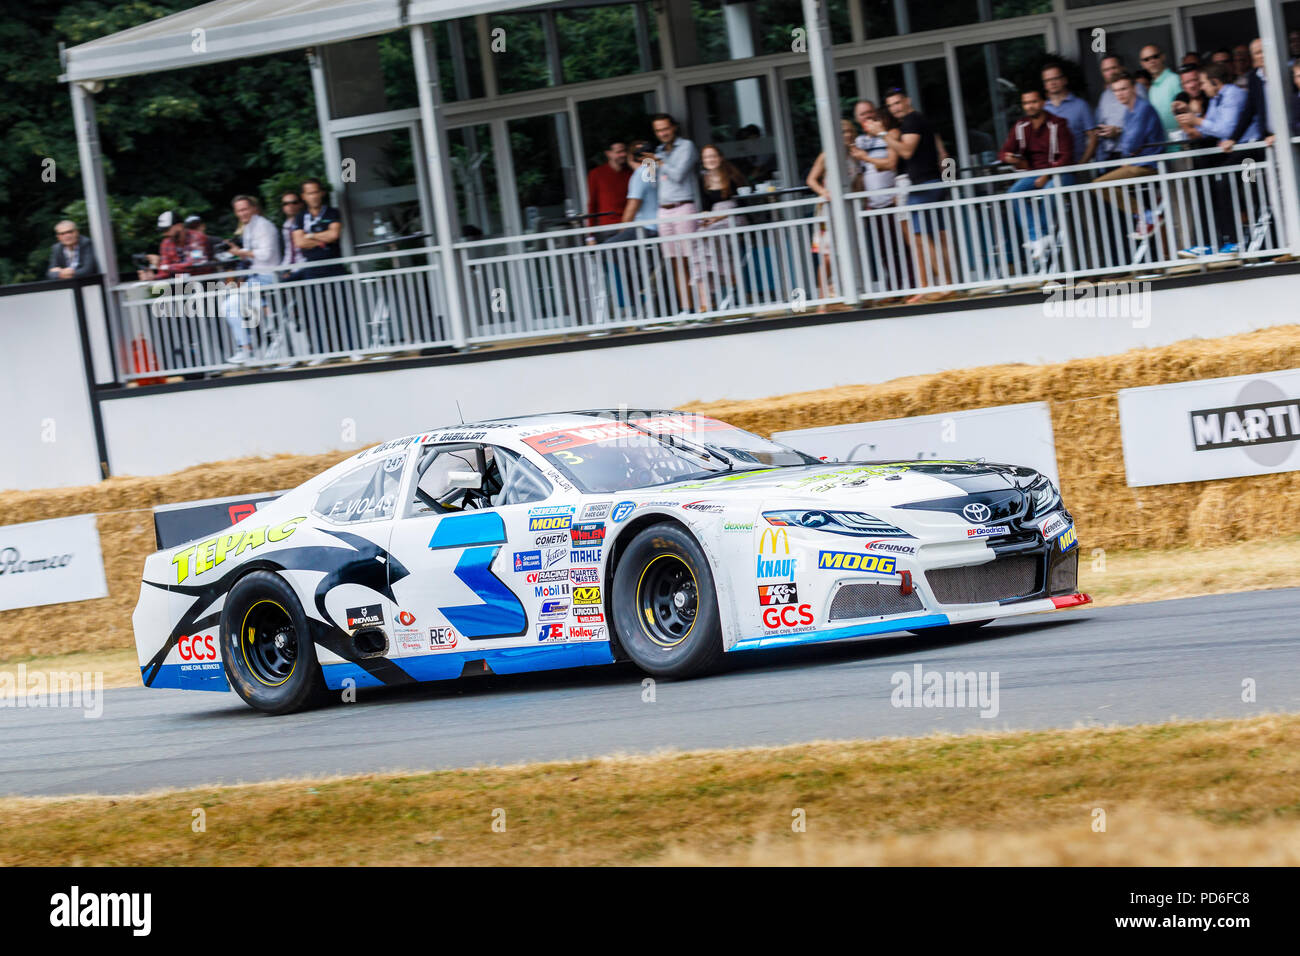 2017 Ford Mustang Euro NASCAR series entrant with driver Jerome Galpin at the 2018 Goodwood Festival of Speed, Sussex, UK. Stock Photo